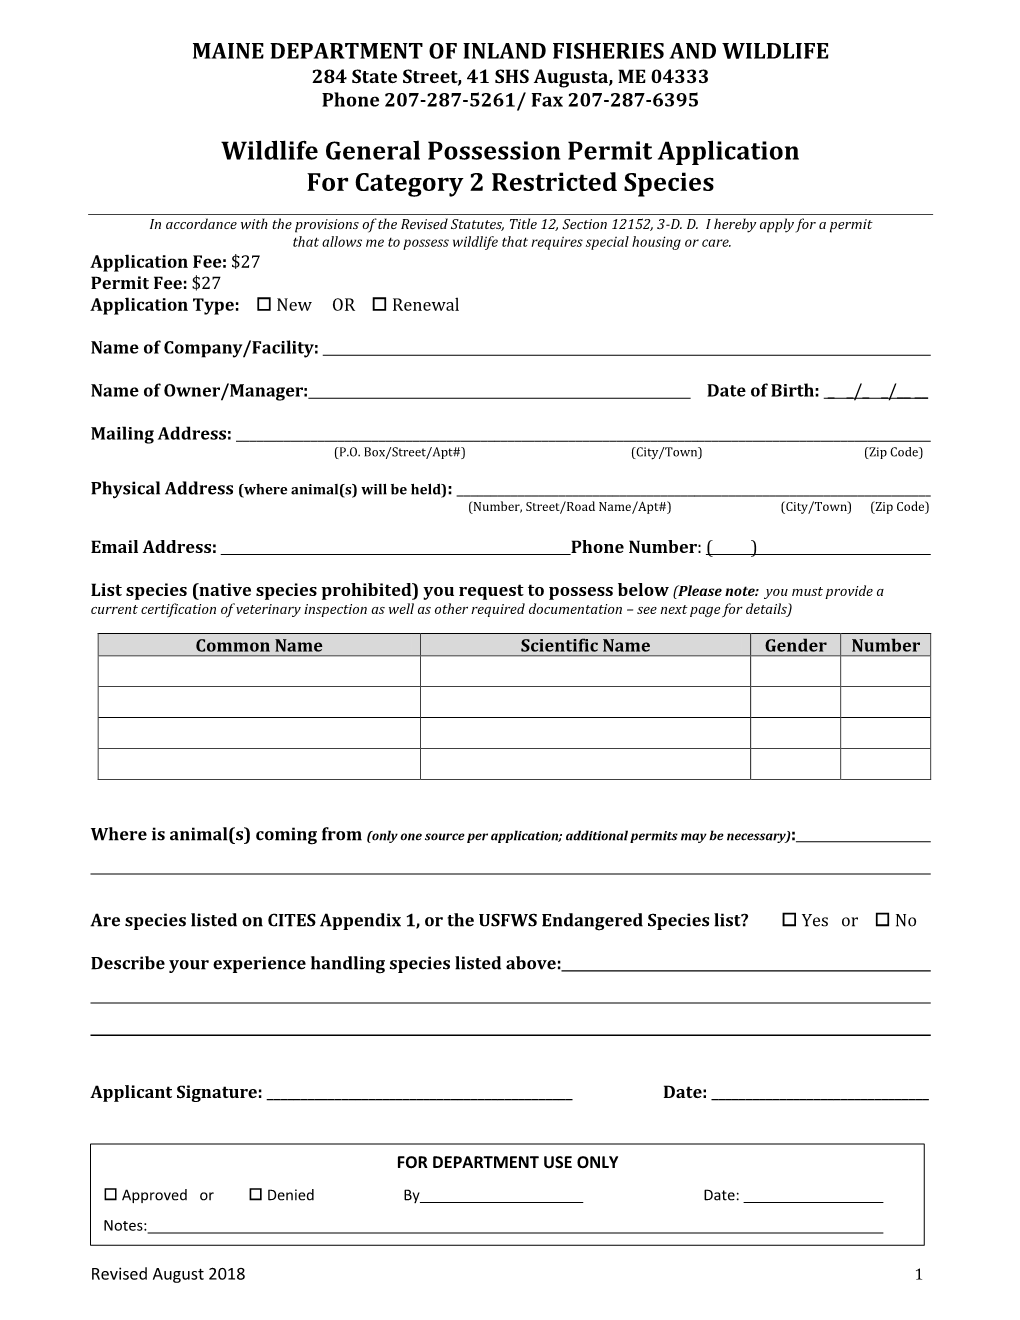 Wildlife General Possession Permit Application for Category 2 Restricted Species